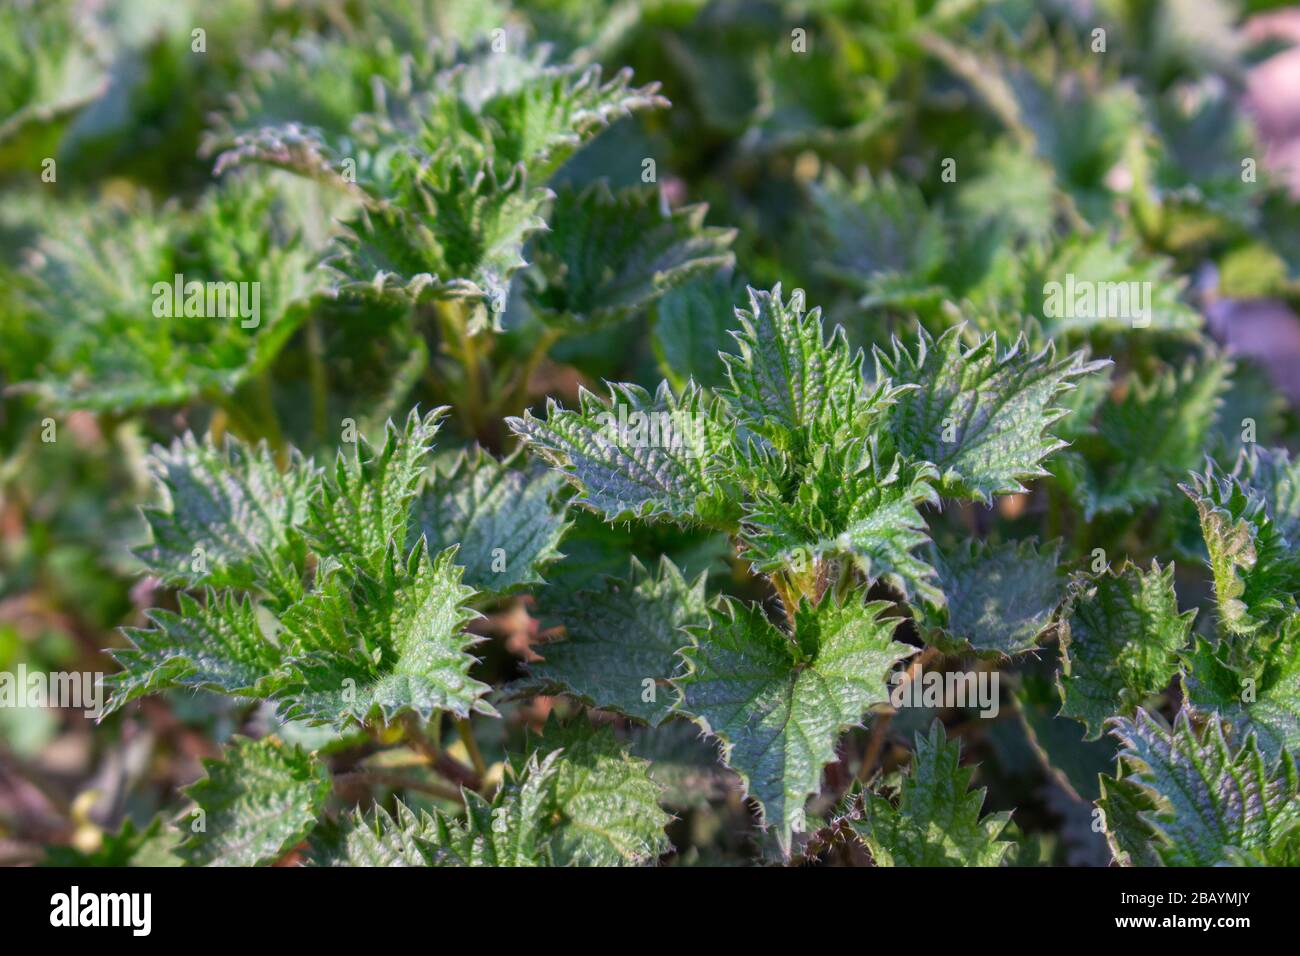 Stinging nettle, a medicinal plant that is used as a bleeding, diuretic, antipyretic, wound healing, antirheumatic agent. Stock Photo